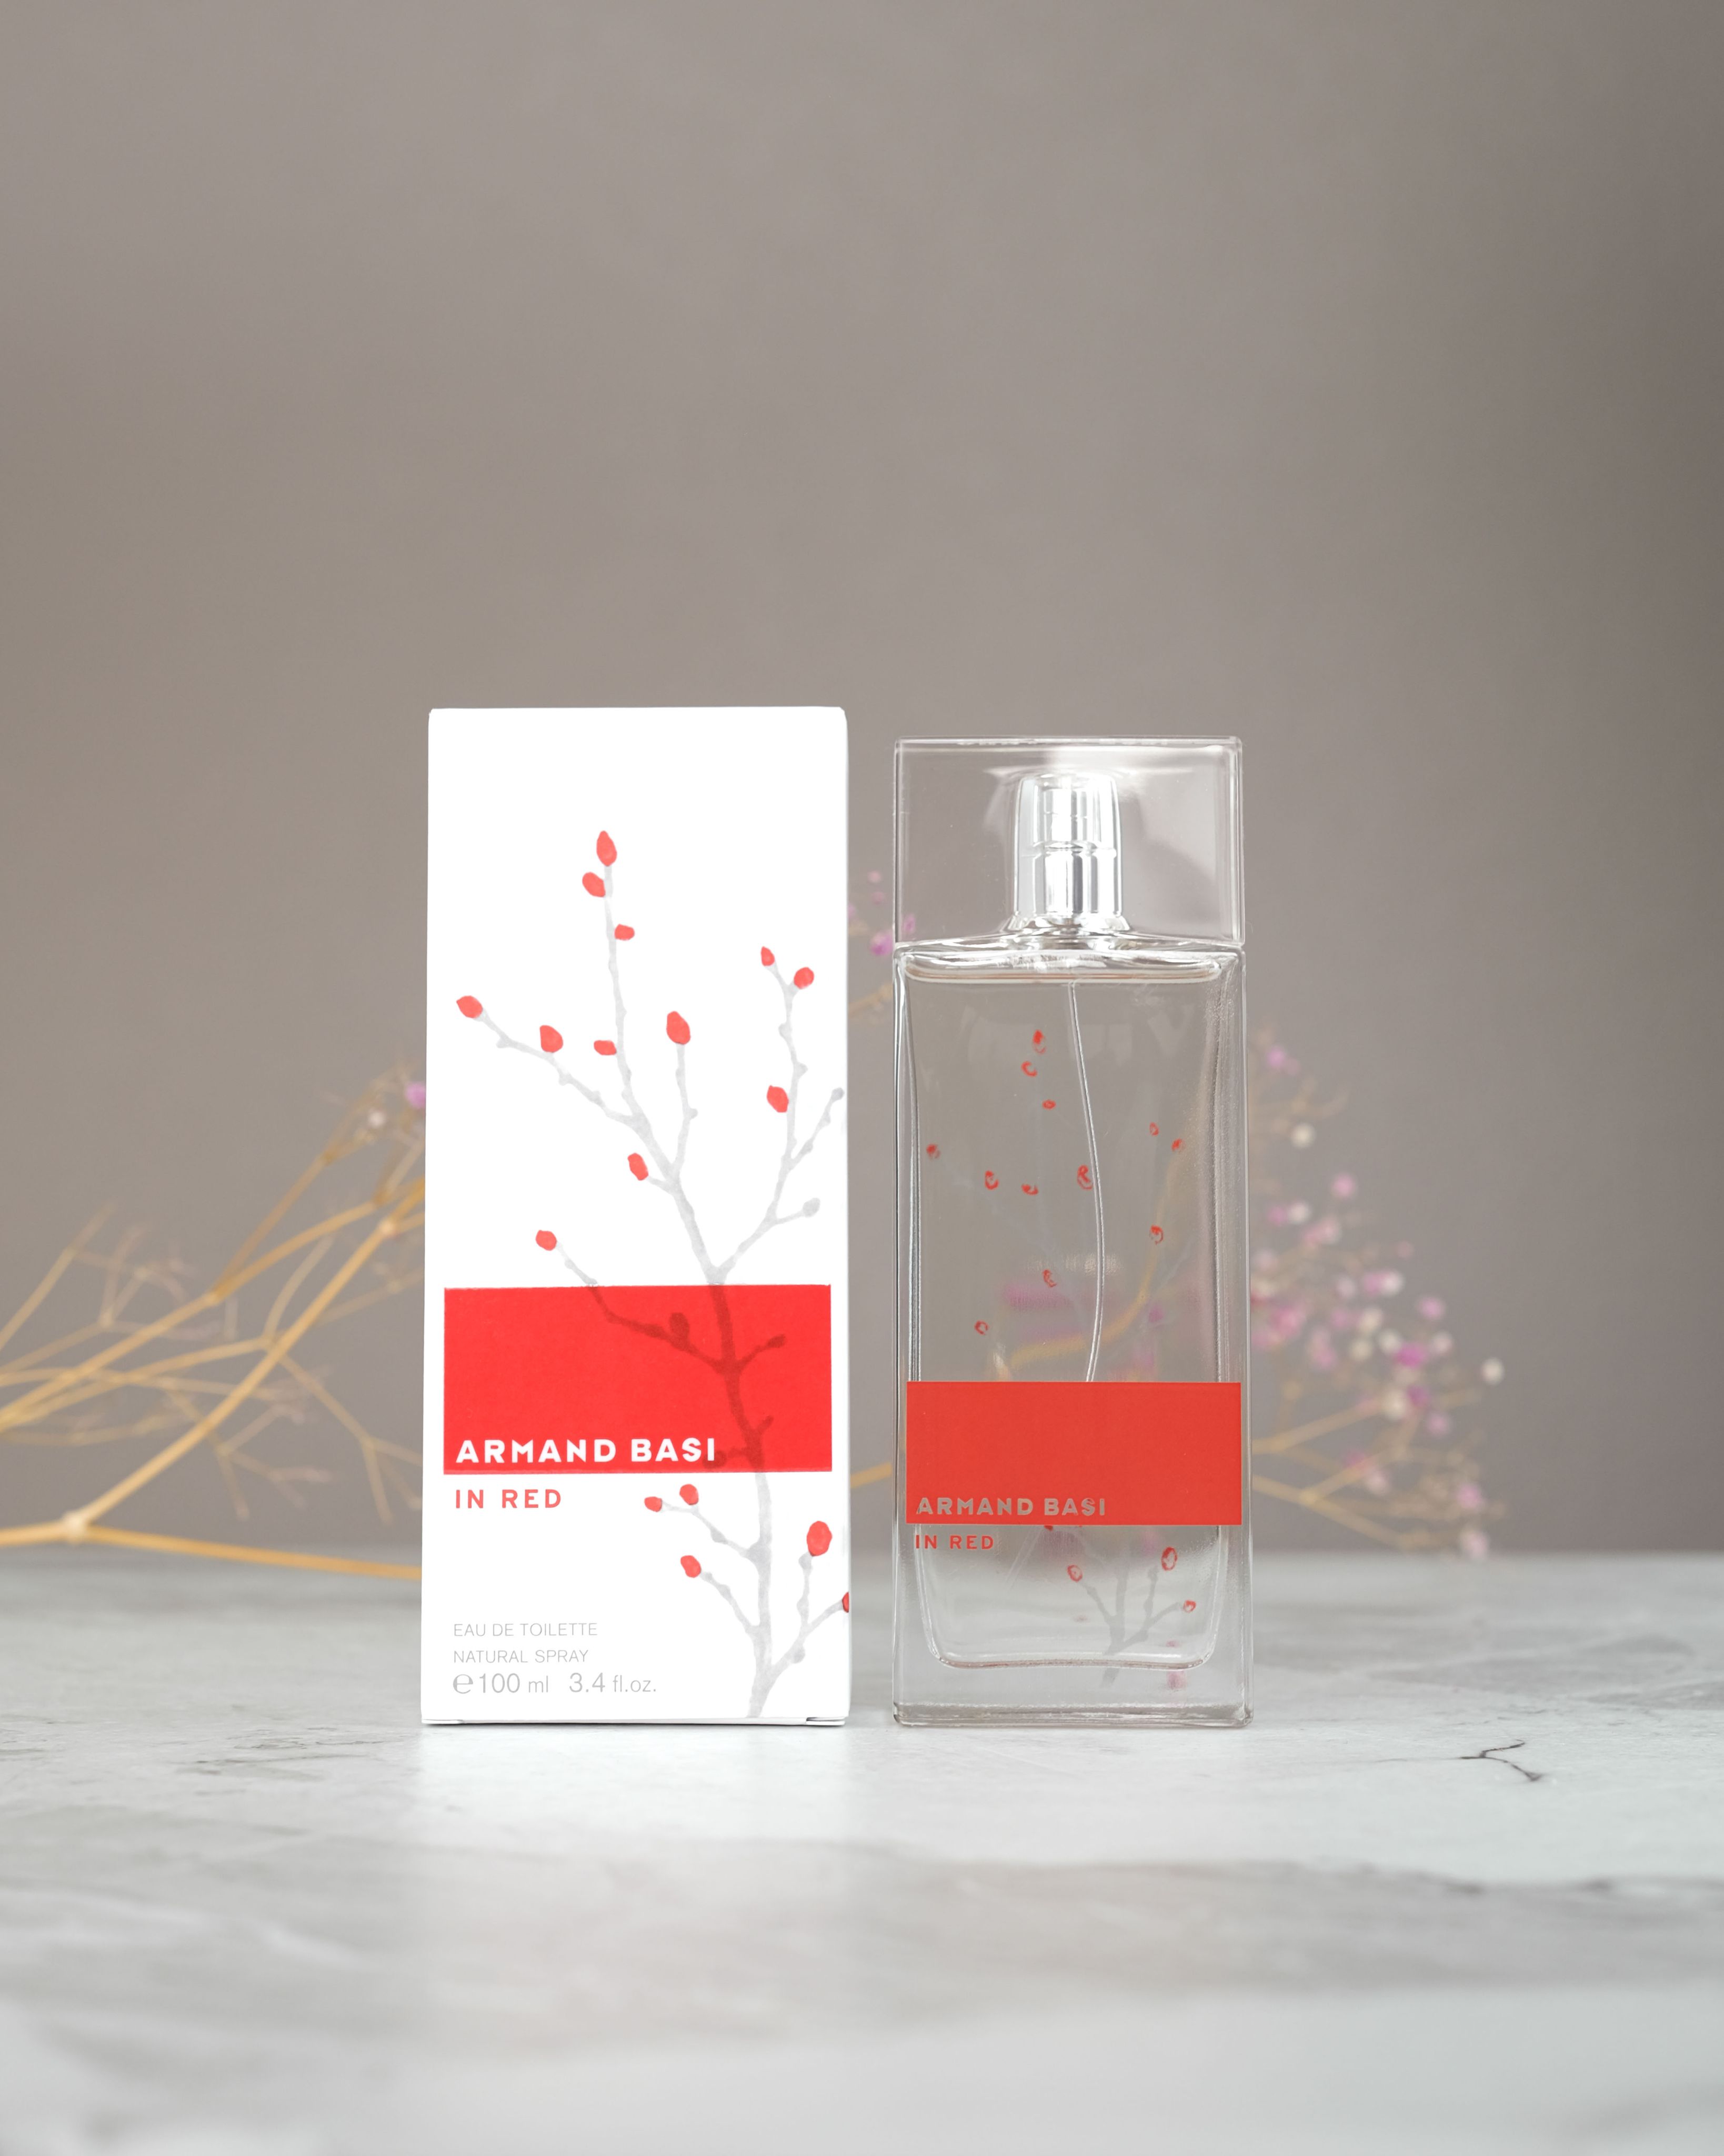 Basi in red отзывы. Armand basi in Red EDT 65 мл. Арманд баси 45 мл. Armand basi in Red.